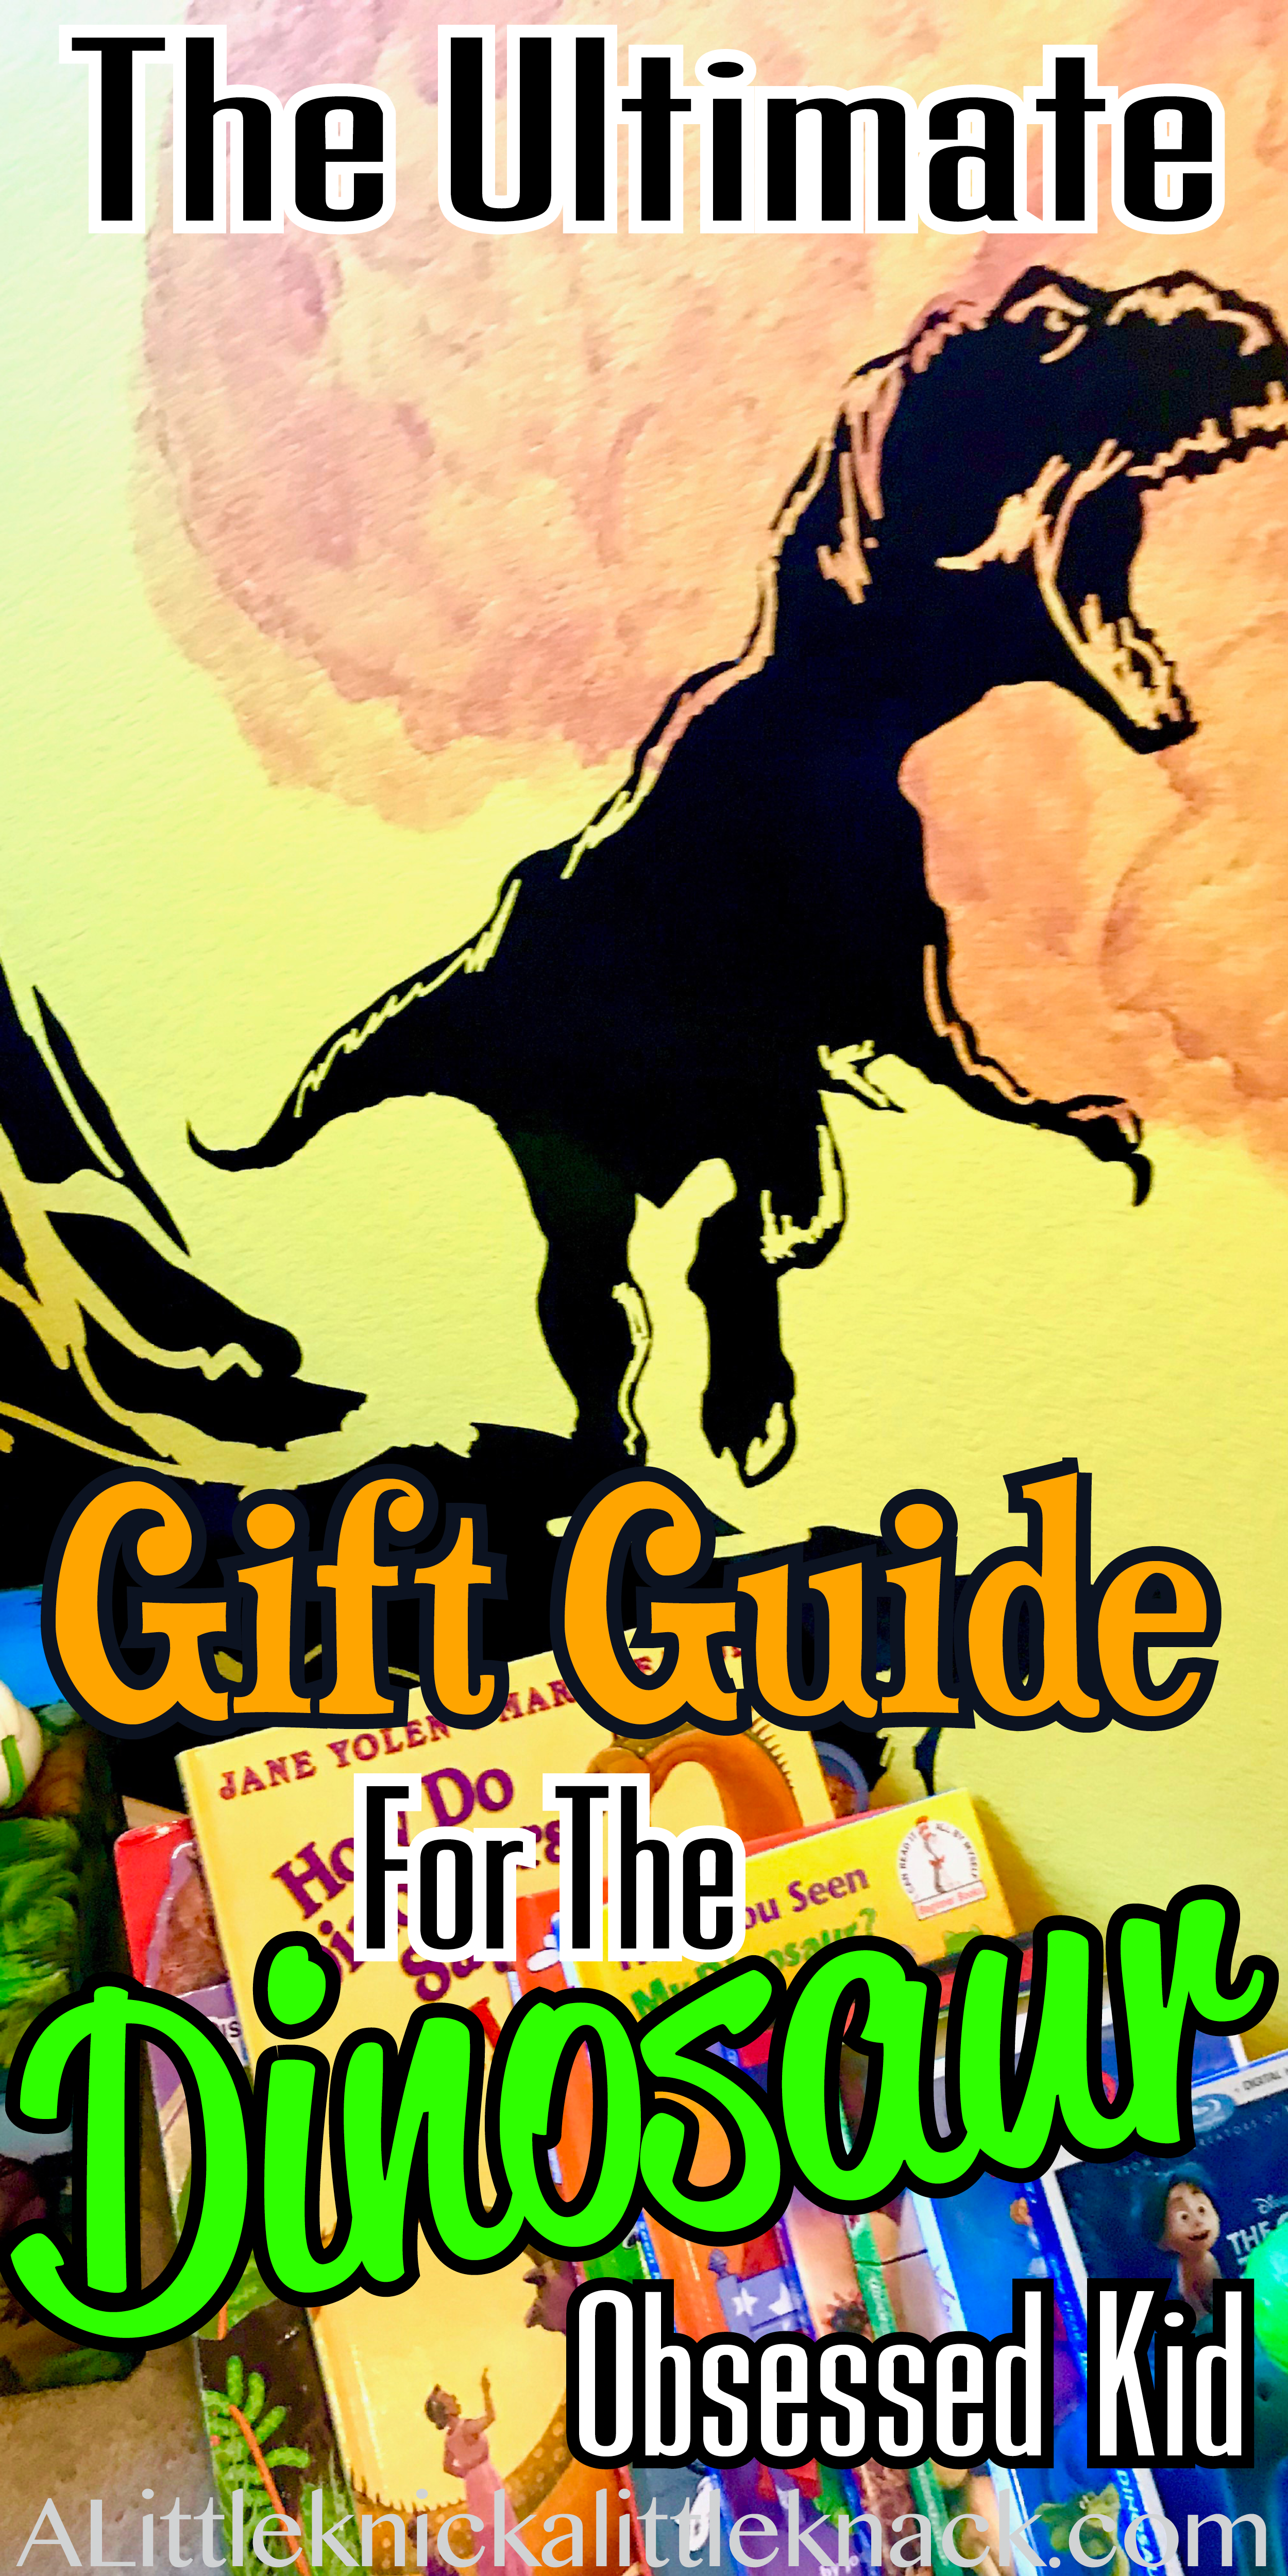 From educational dinosaur movies to jurassic toys they won’t stop playing with, this guide has it all! #gifts